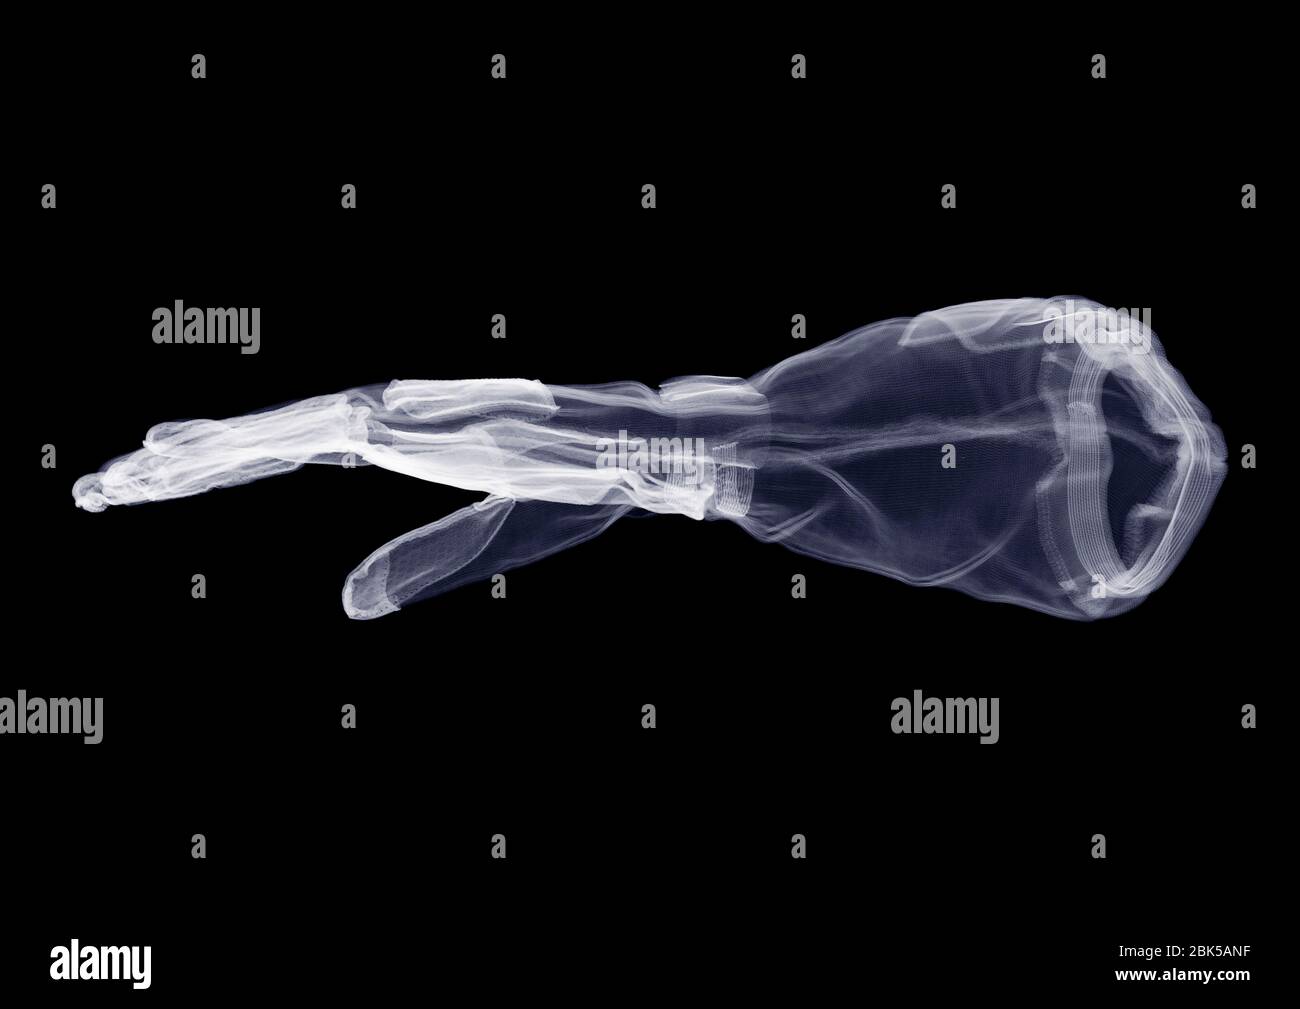 Gauntlet glove from side, X-ray. Stock Photo